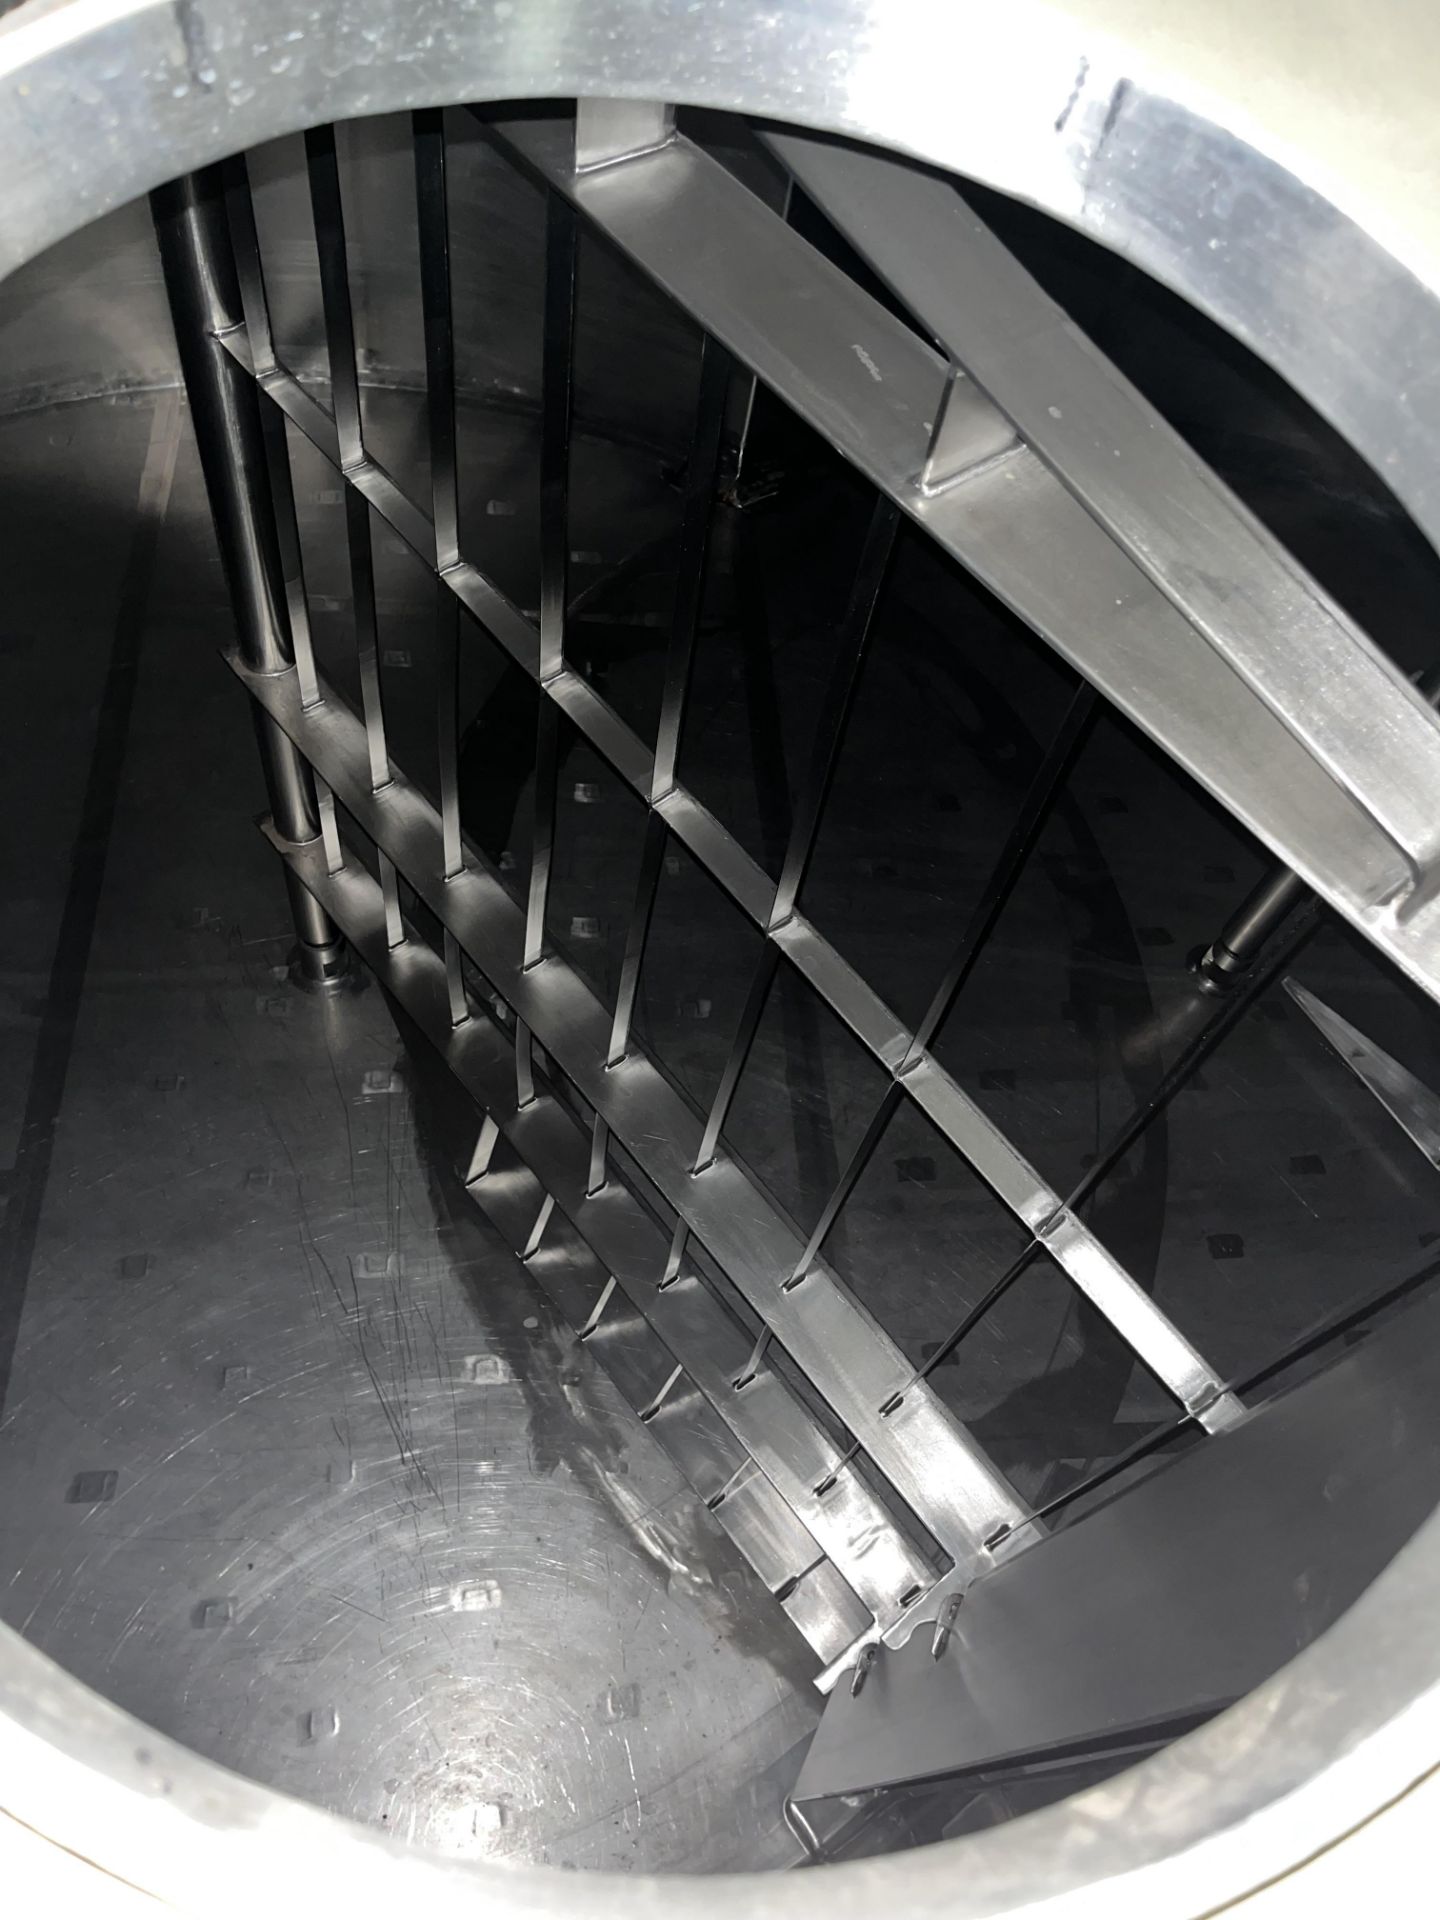 Damrow Double O S/S Cheese Vat (OO Tank #1) (LOCATED IN MANTECA, CA) - Image 4 of 15